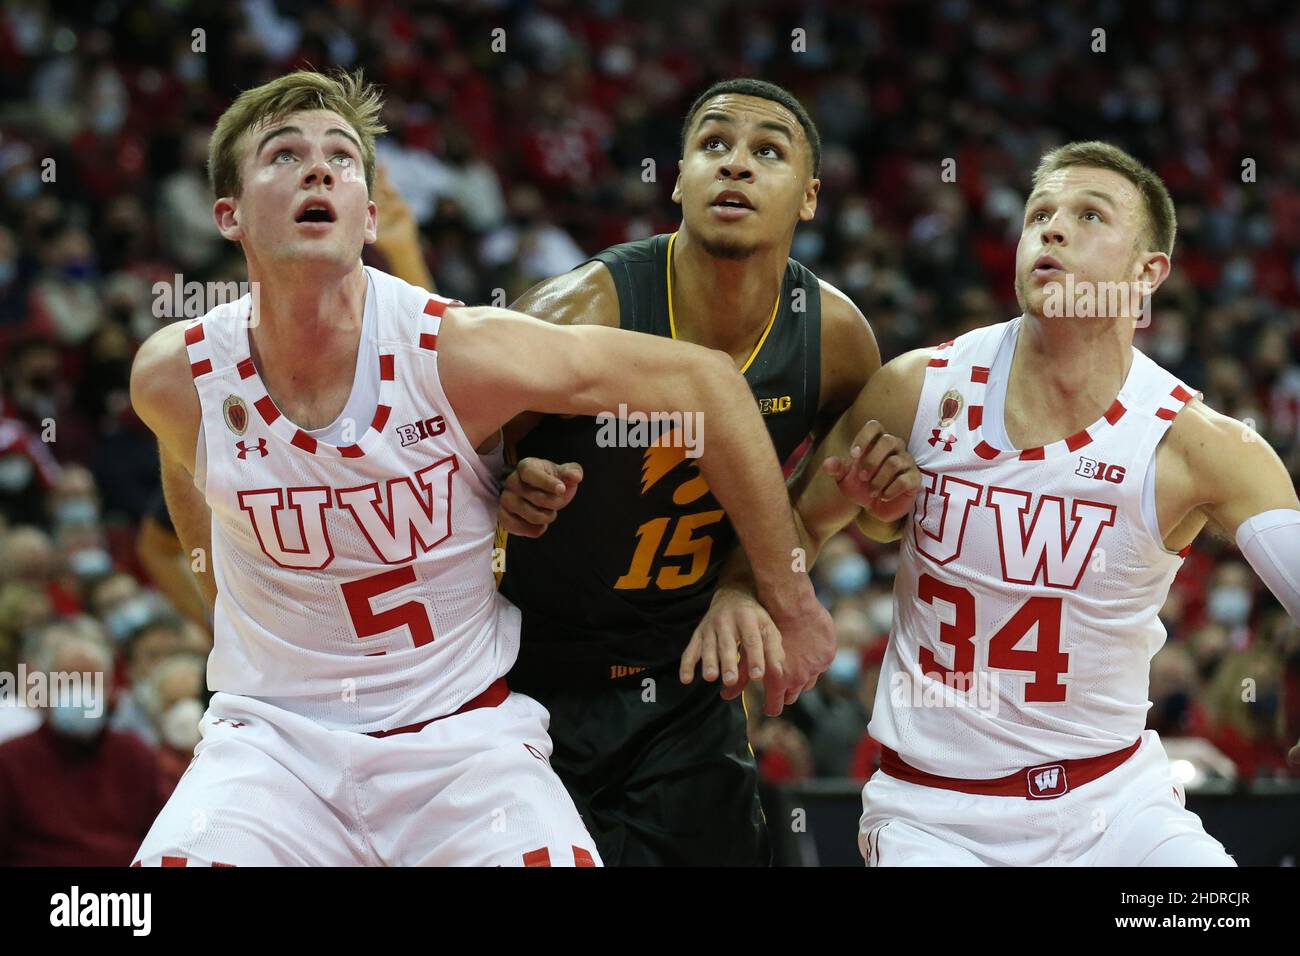 Madison, WI, USA. 06th Jan, 2022. Wisconsin Badgers forward Tyler Wahl (5) and guard Brad Davison (34) block out Iowa Hawkeyes forward Keegan Murray (15) during the NCAA Basketball game between the Iowa Hawkeyes and the Wisconsin Badgers at the Kohl Center in Madison, WI. Darren Lee/CSM/Alamy Live News Stock Photo